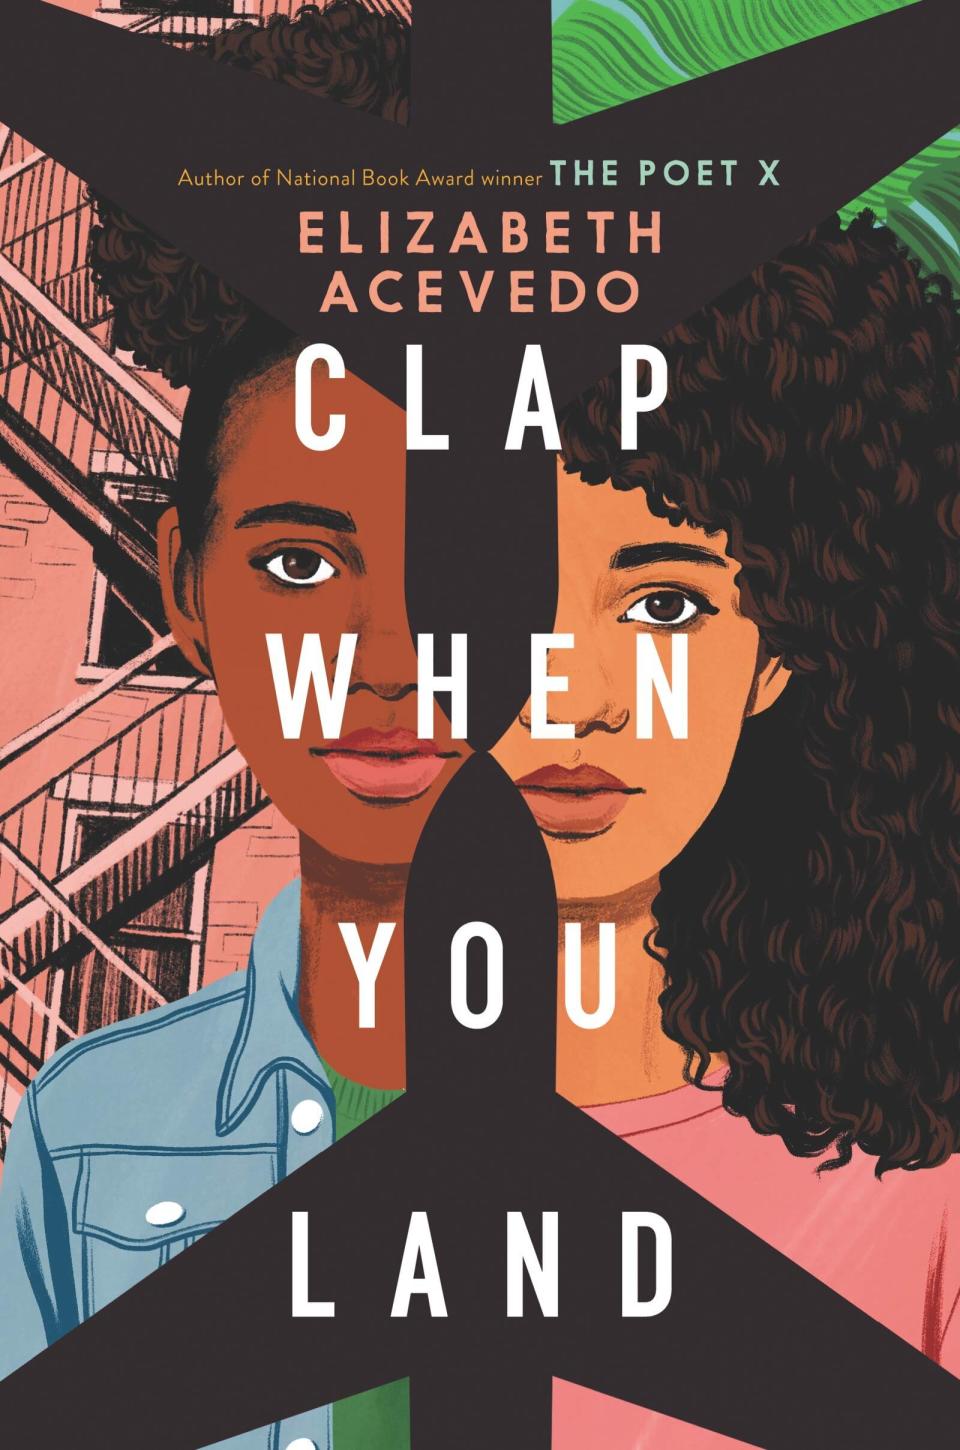 "Clap When You Land" is a novel in verse, meaning it's <a href="https://poets.org/glossary/verse-novel" target="_blank" rel="noopener noreferrer">told through poetry</a>. The book is about two sisters, one who lives in New York City and the other who lives in the Dominican Republic, who find out that their dad has died in a plane crash. While apart from each other, Camino and Yahaira have to figure out their new world without him. <br /><br />You can read more about this book on <a href="https://fave.co/3kIbFkQ" target="_blank" rel="noopener noreferrer">Goodreads</a> and find it for $17 at <a href="https://fave.co/33UxeIe" target="_blank" rel="noopener noreferrer">Bookshop</a>. It&rsquo;s also available at <a href="https://amzn.to/32WMFAk" target="_blank" rel="noopener noreferrer">Amazon</a>.